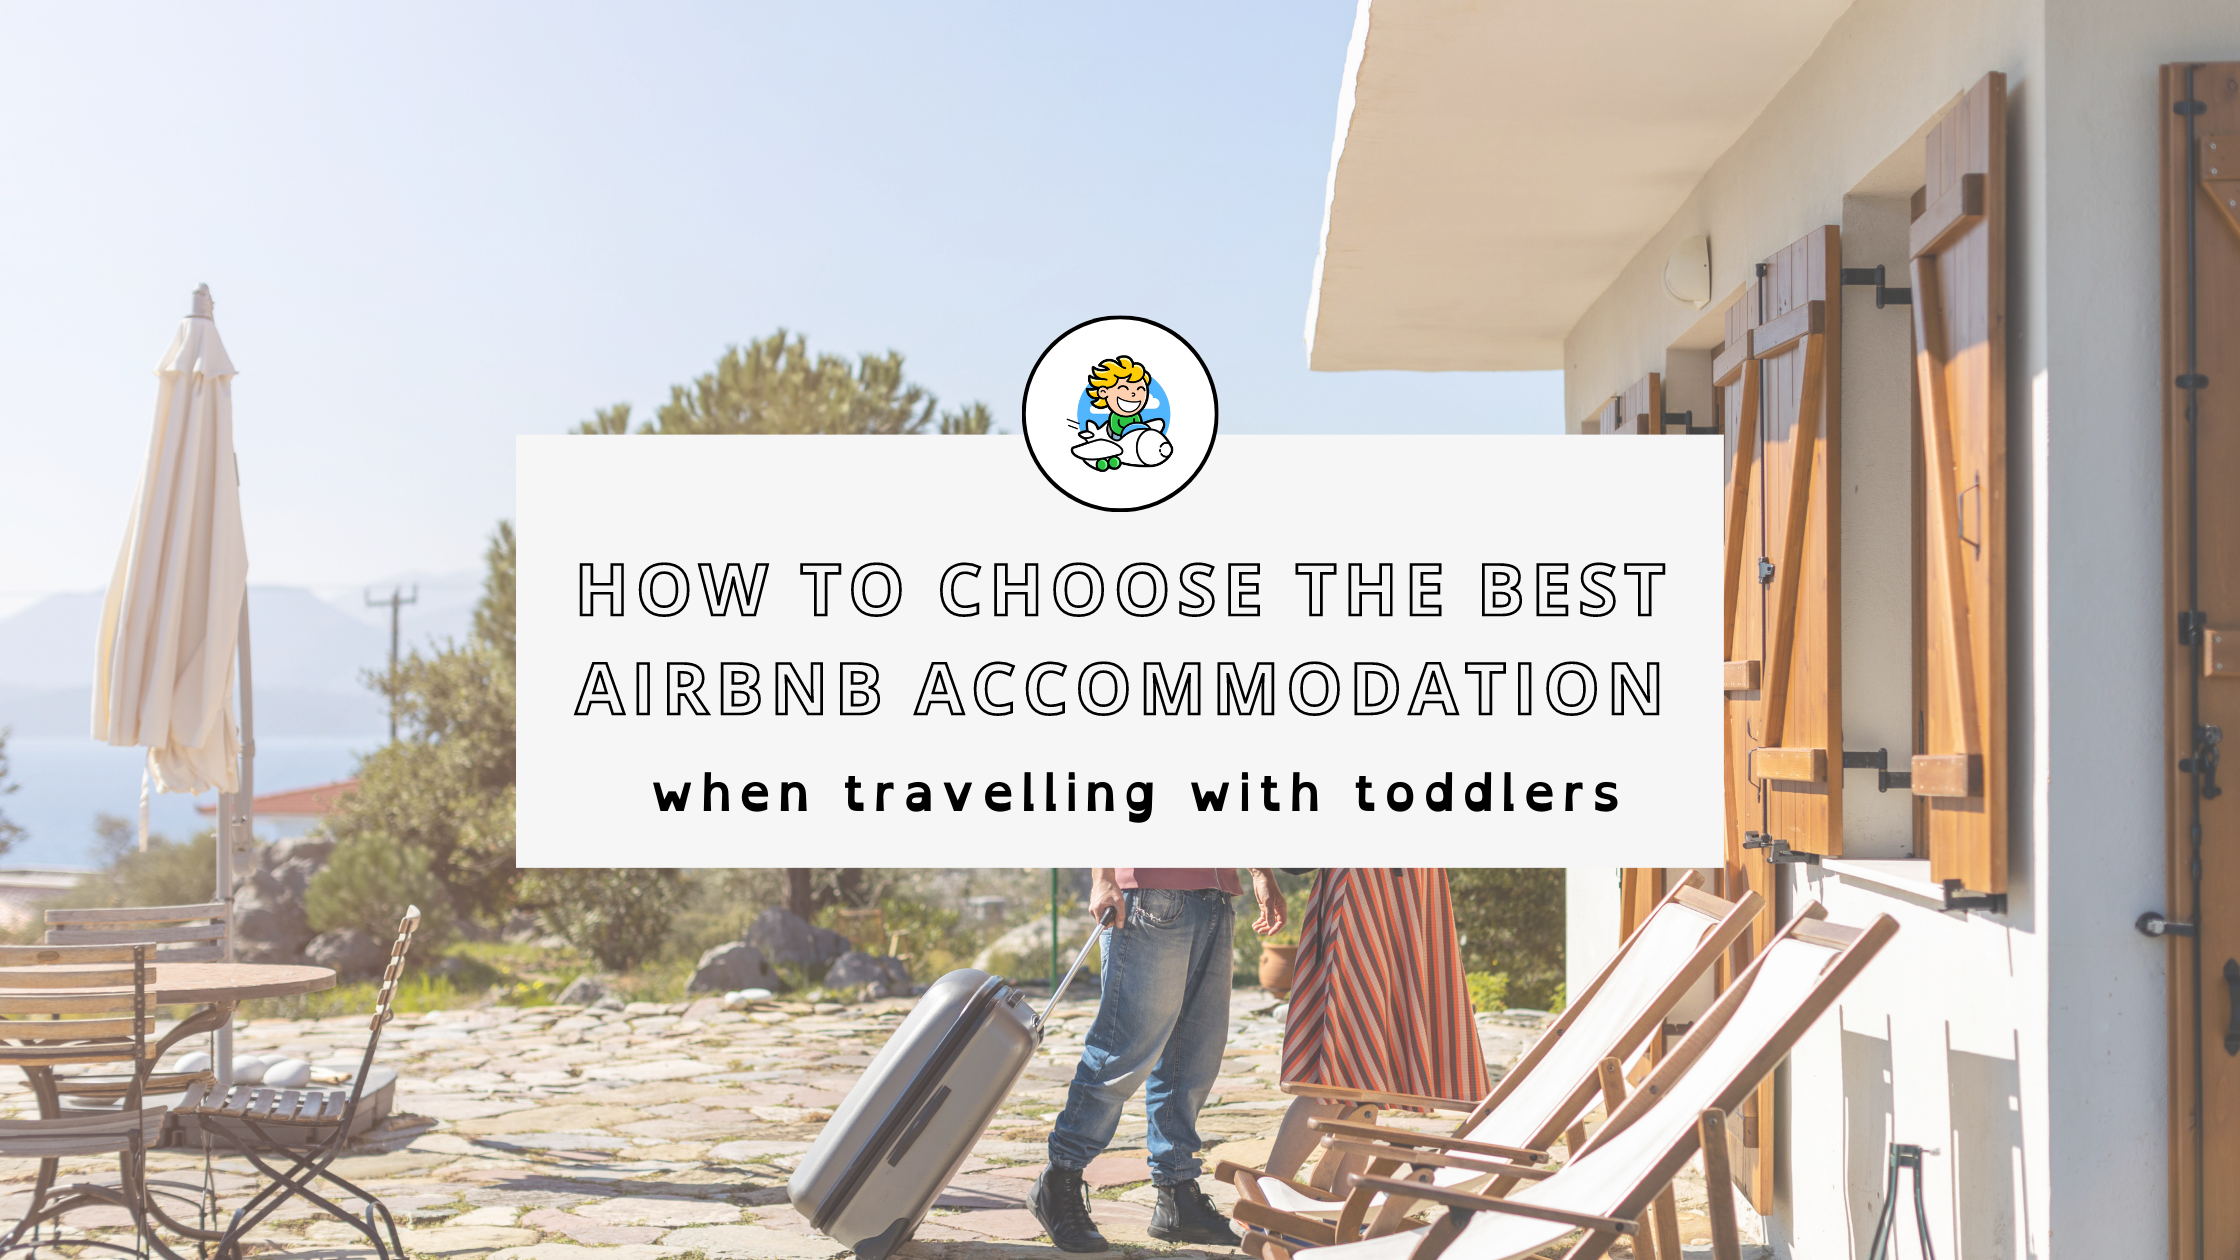 How to Choose the Best Airbnb Accommodation When Travelling with Toddlers